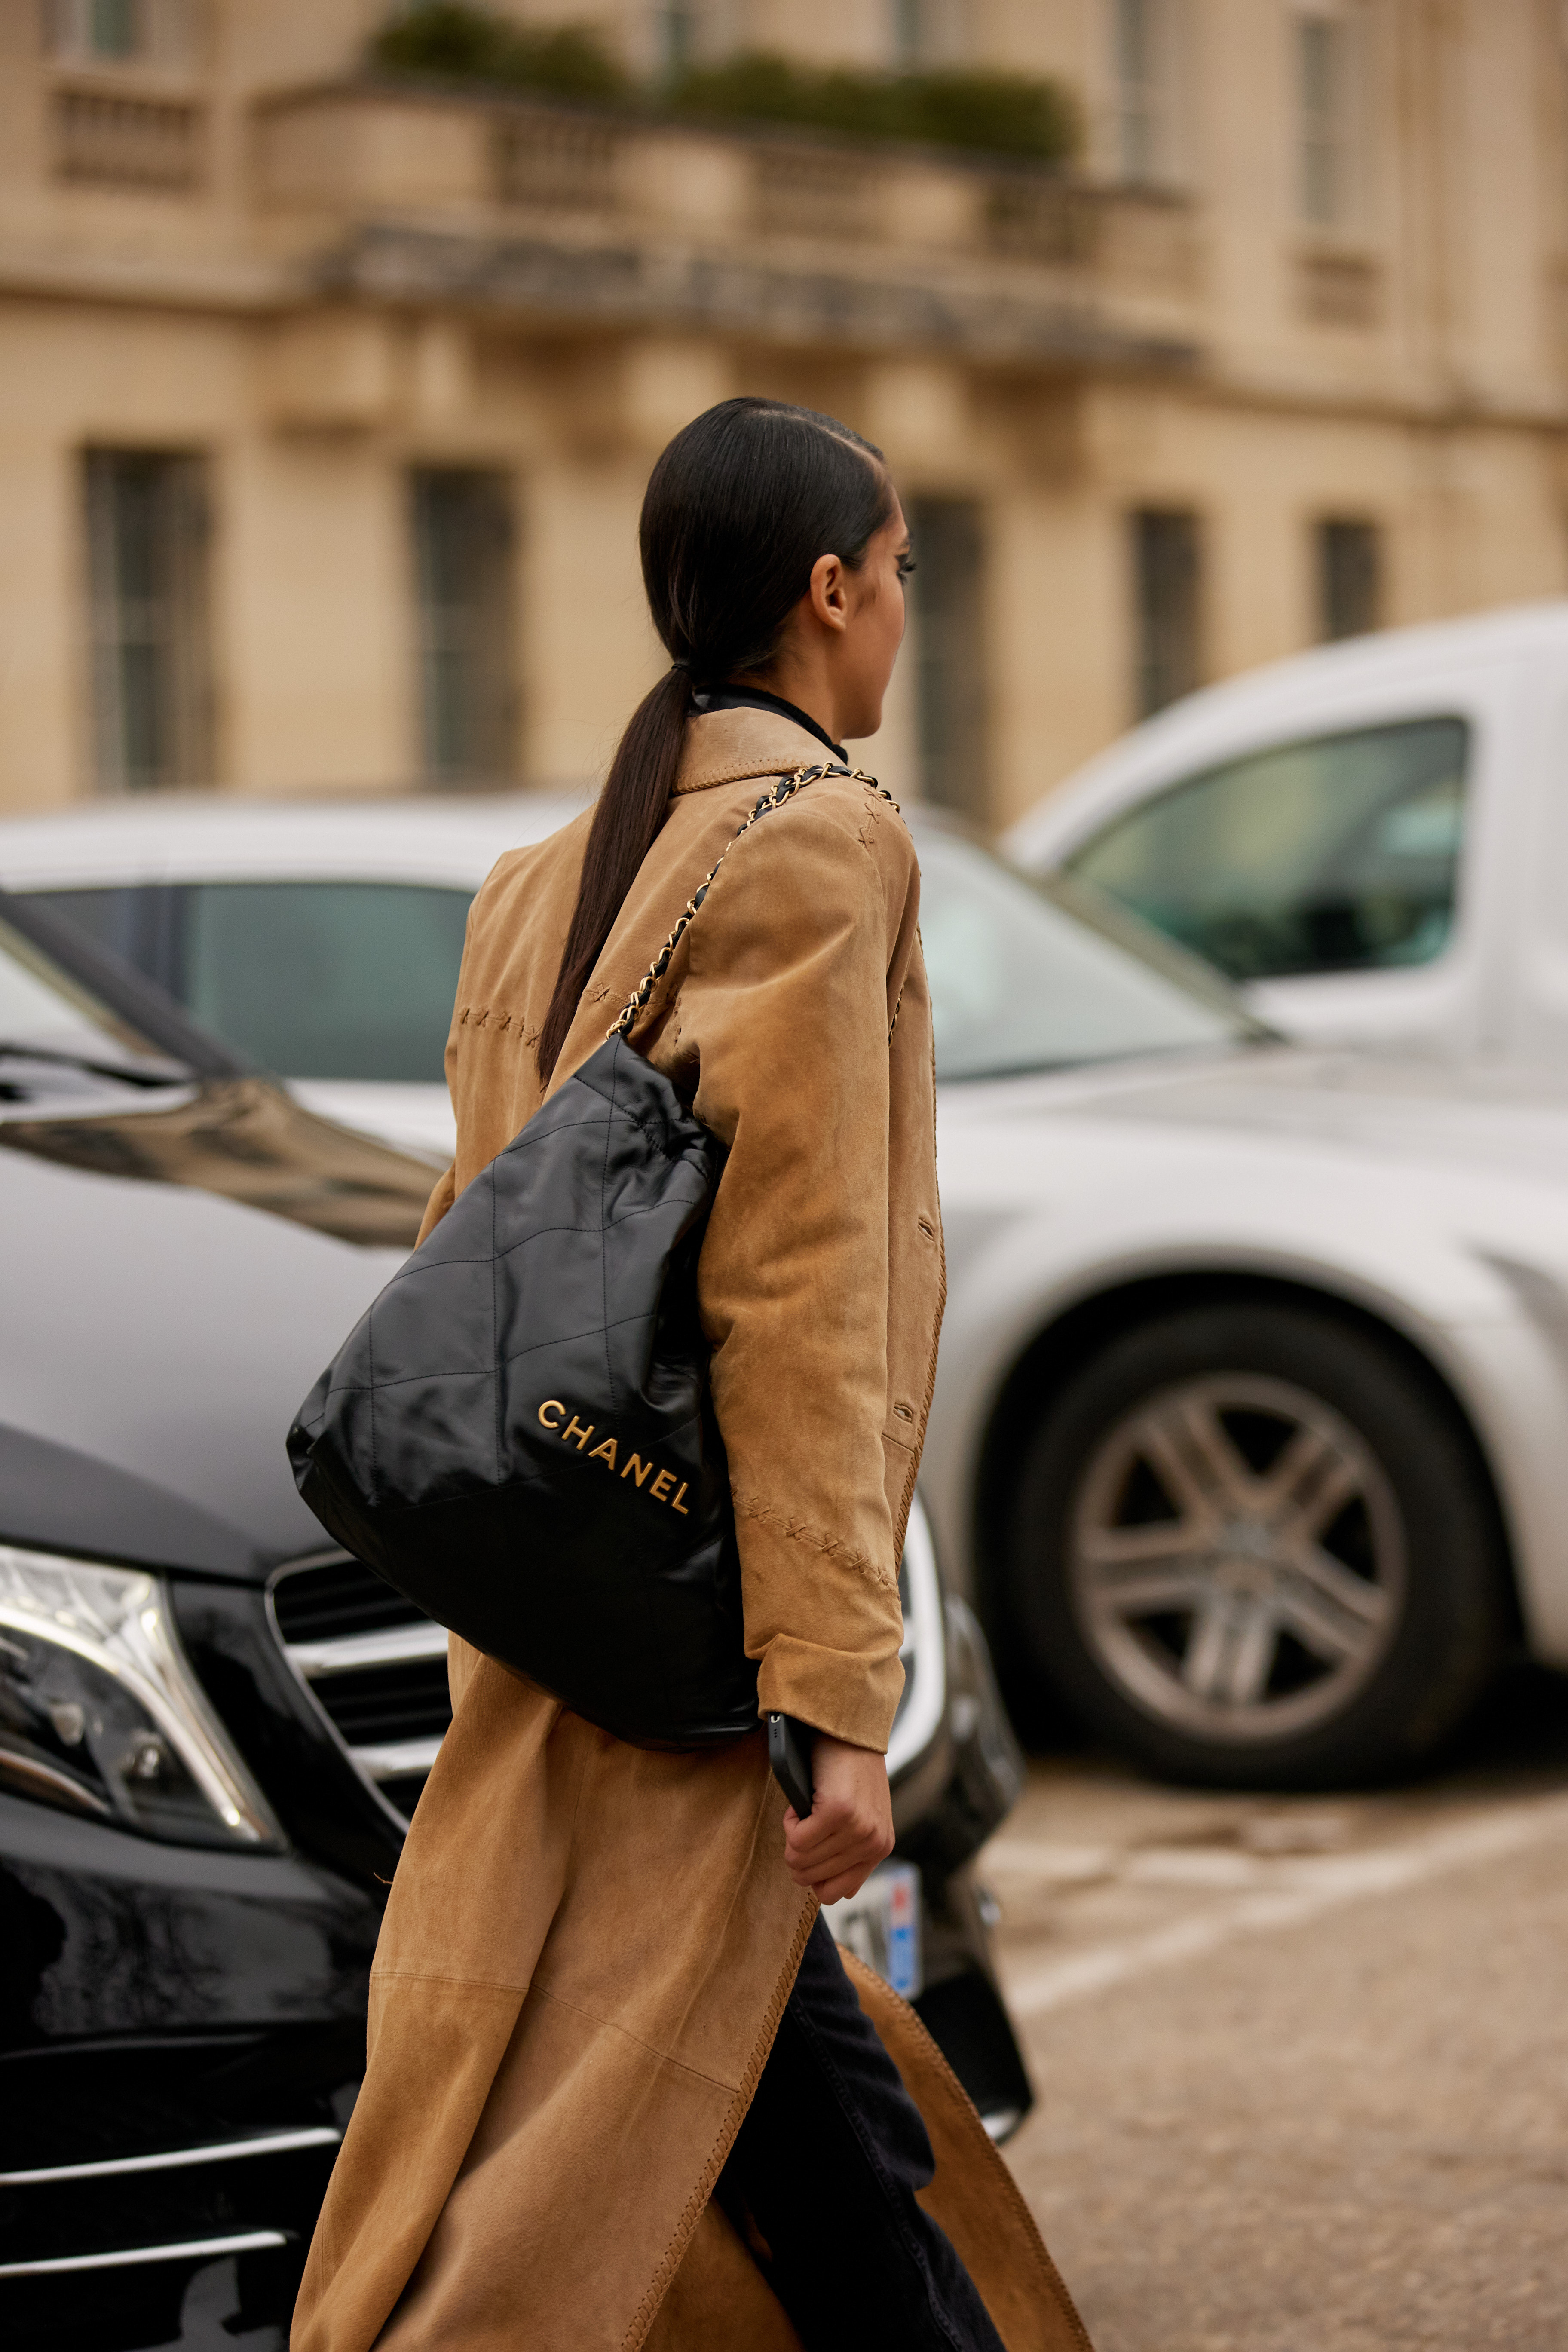 Paris couture street style trends: big totes